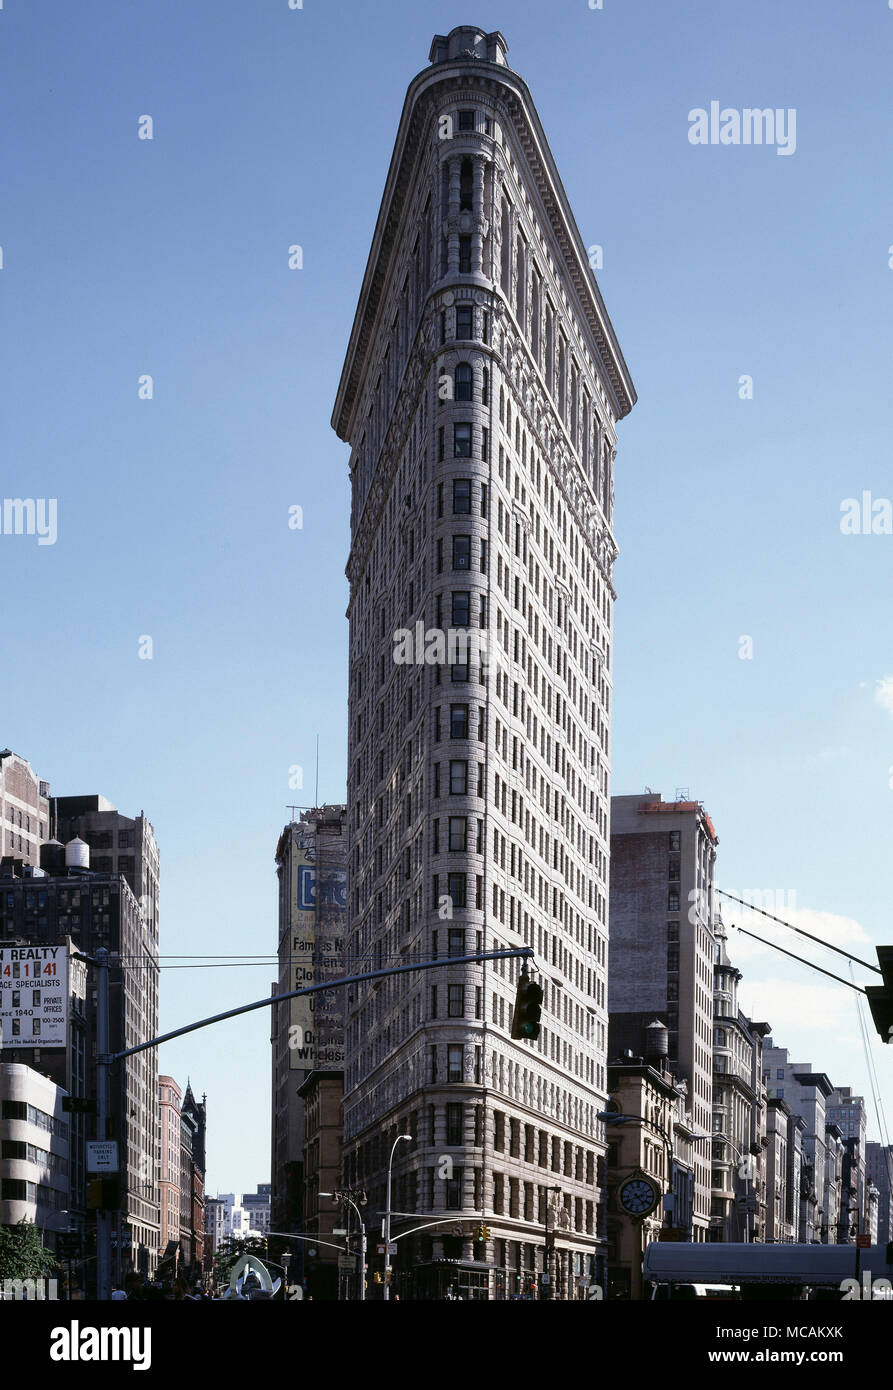 The Flatiron Building, originally the Fuller Building, is located at 175  Fifth Avenue in the borough of Manhattan, New York City, and is considered  to be a groundbreaking skyscraper. Upon completion in